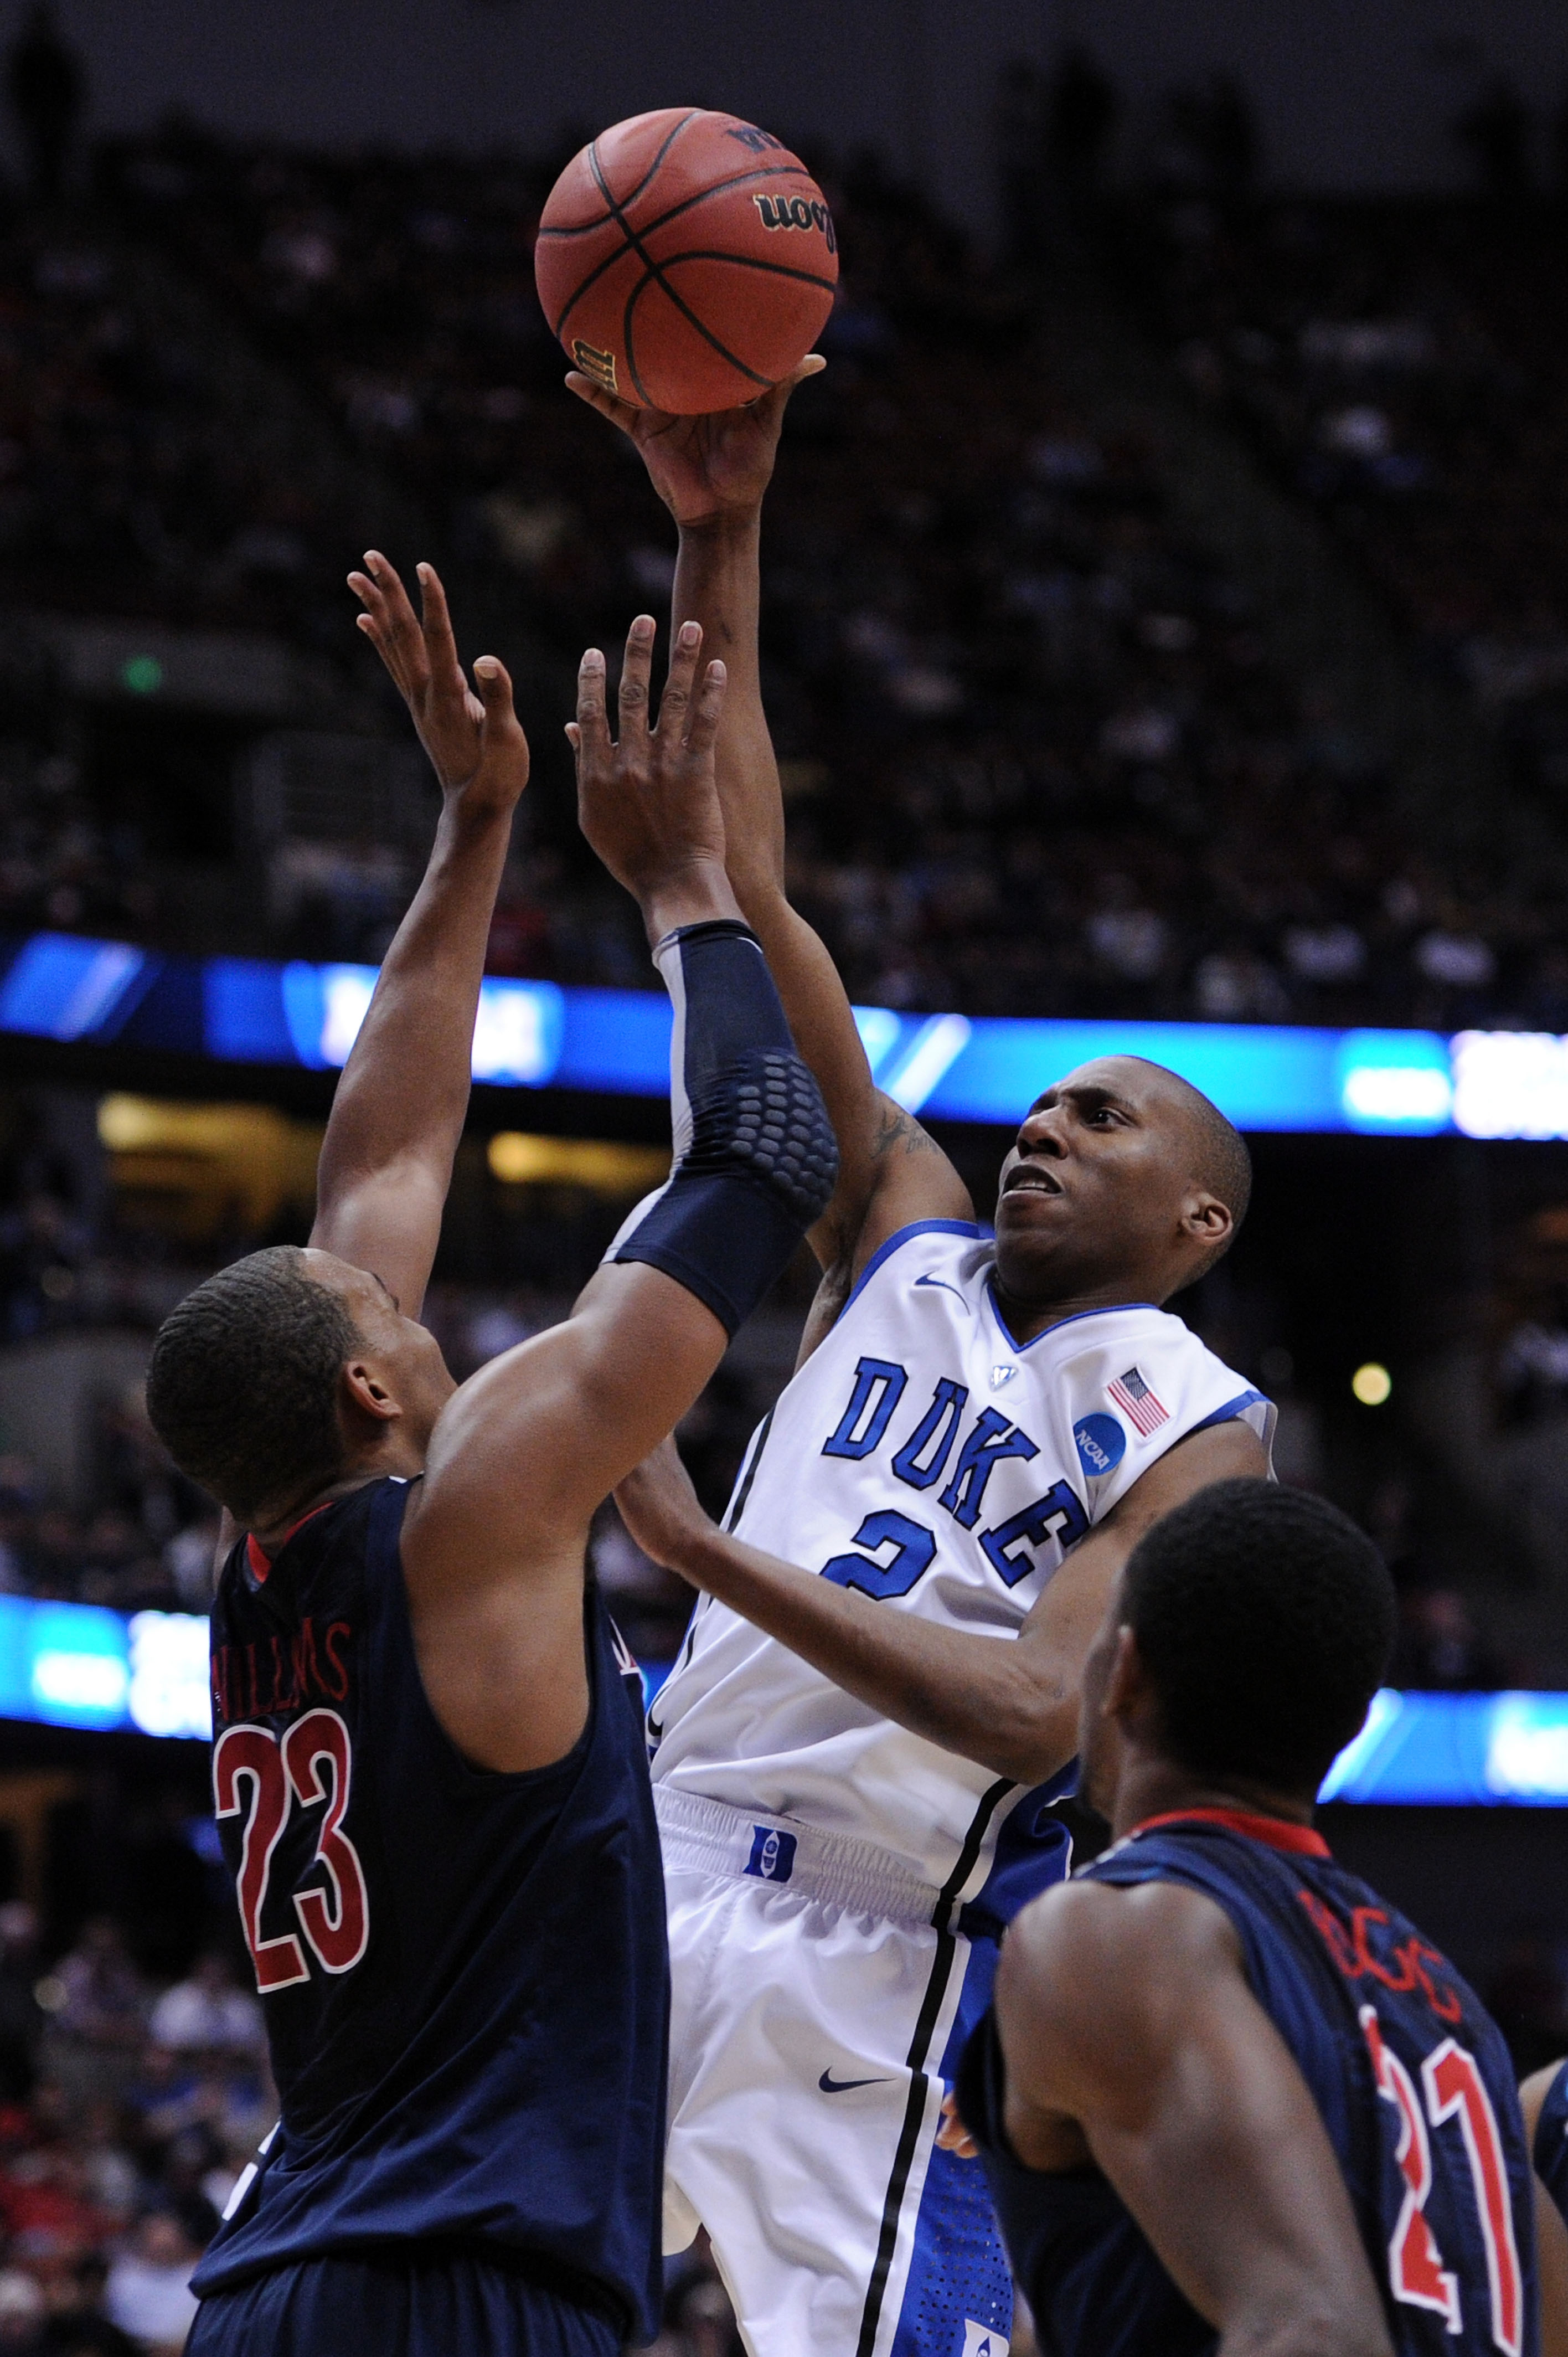 ANAHEIM, CA - MARCH 24:  Nolan Smith #2 of the Duke Blue Devils shoot the ball over Derrick Williams #23 of the Arizona Wildcats during the west regional semifinal of the 2011 NCAA men's basketball tournament at the Honda Center on March 24, 2011 in Anahe